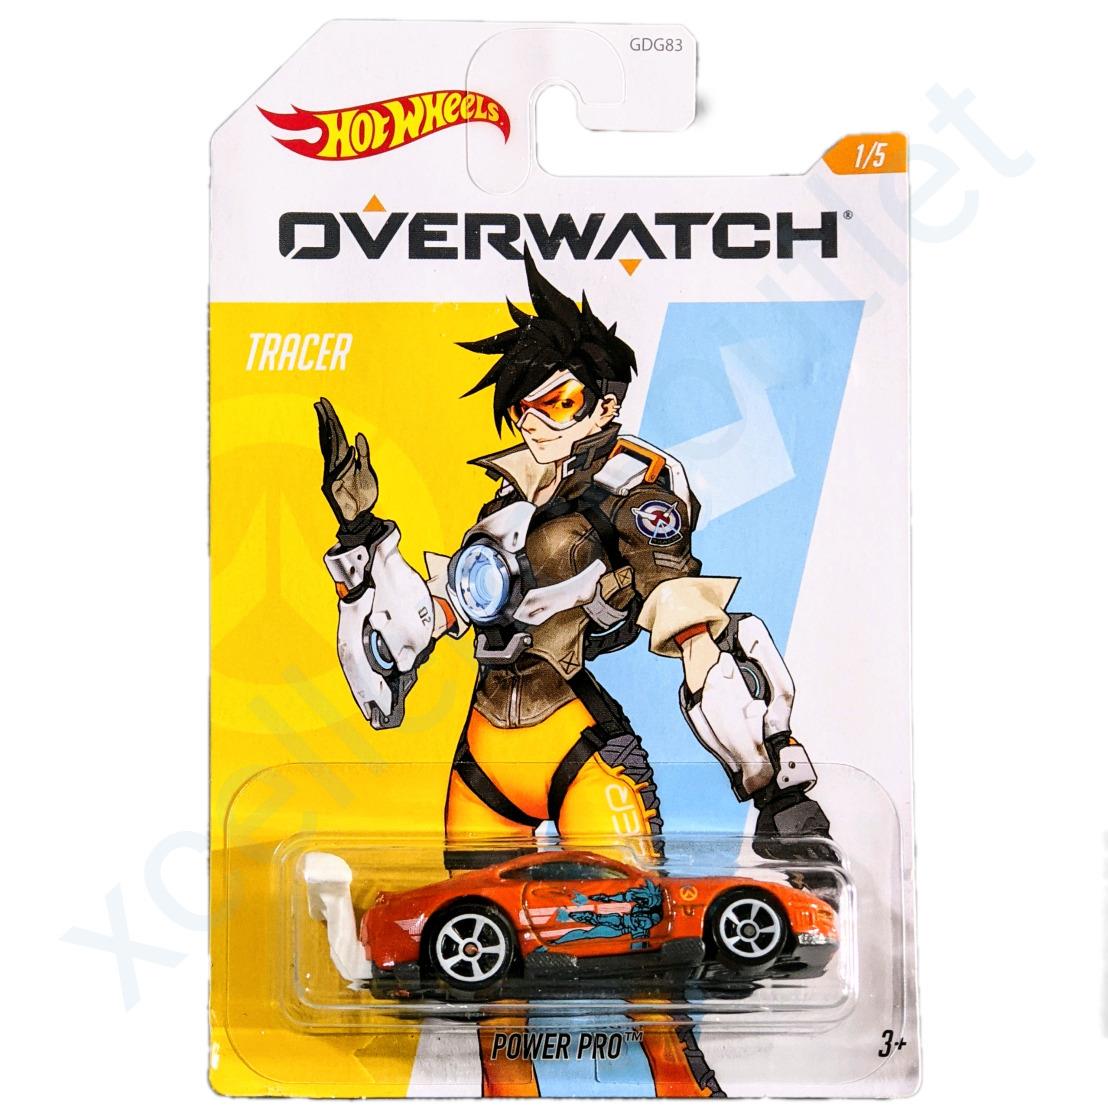 Hot Wheels Over Watch Series Overwatch Collectable Die-cast Mini Cars Set of 5 - 